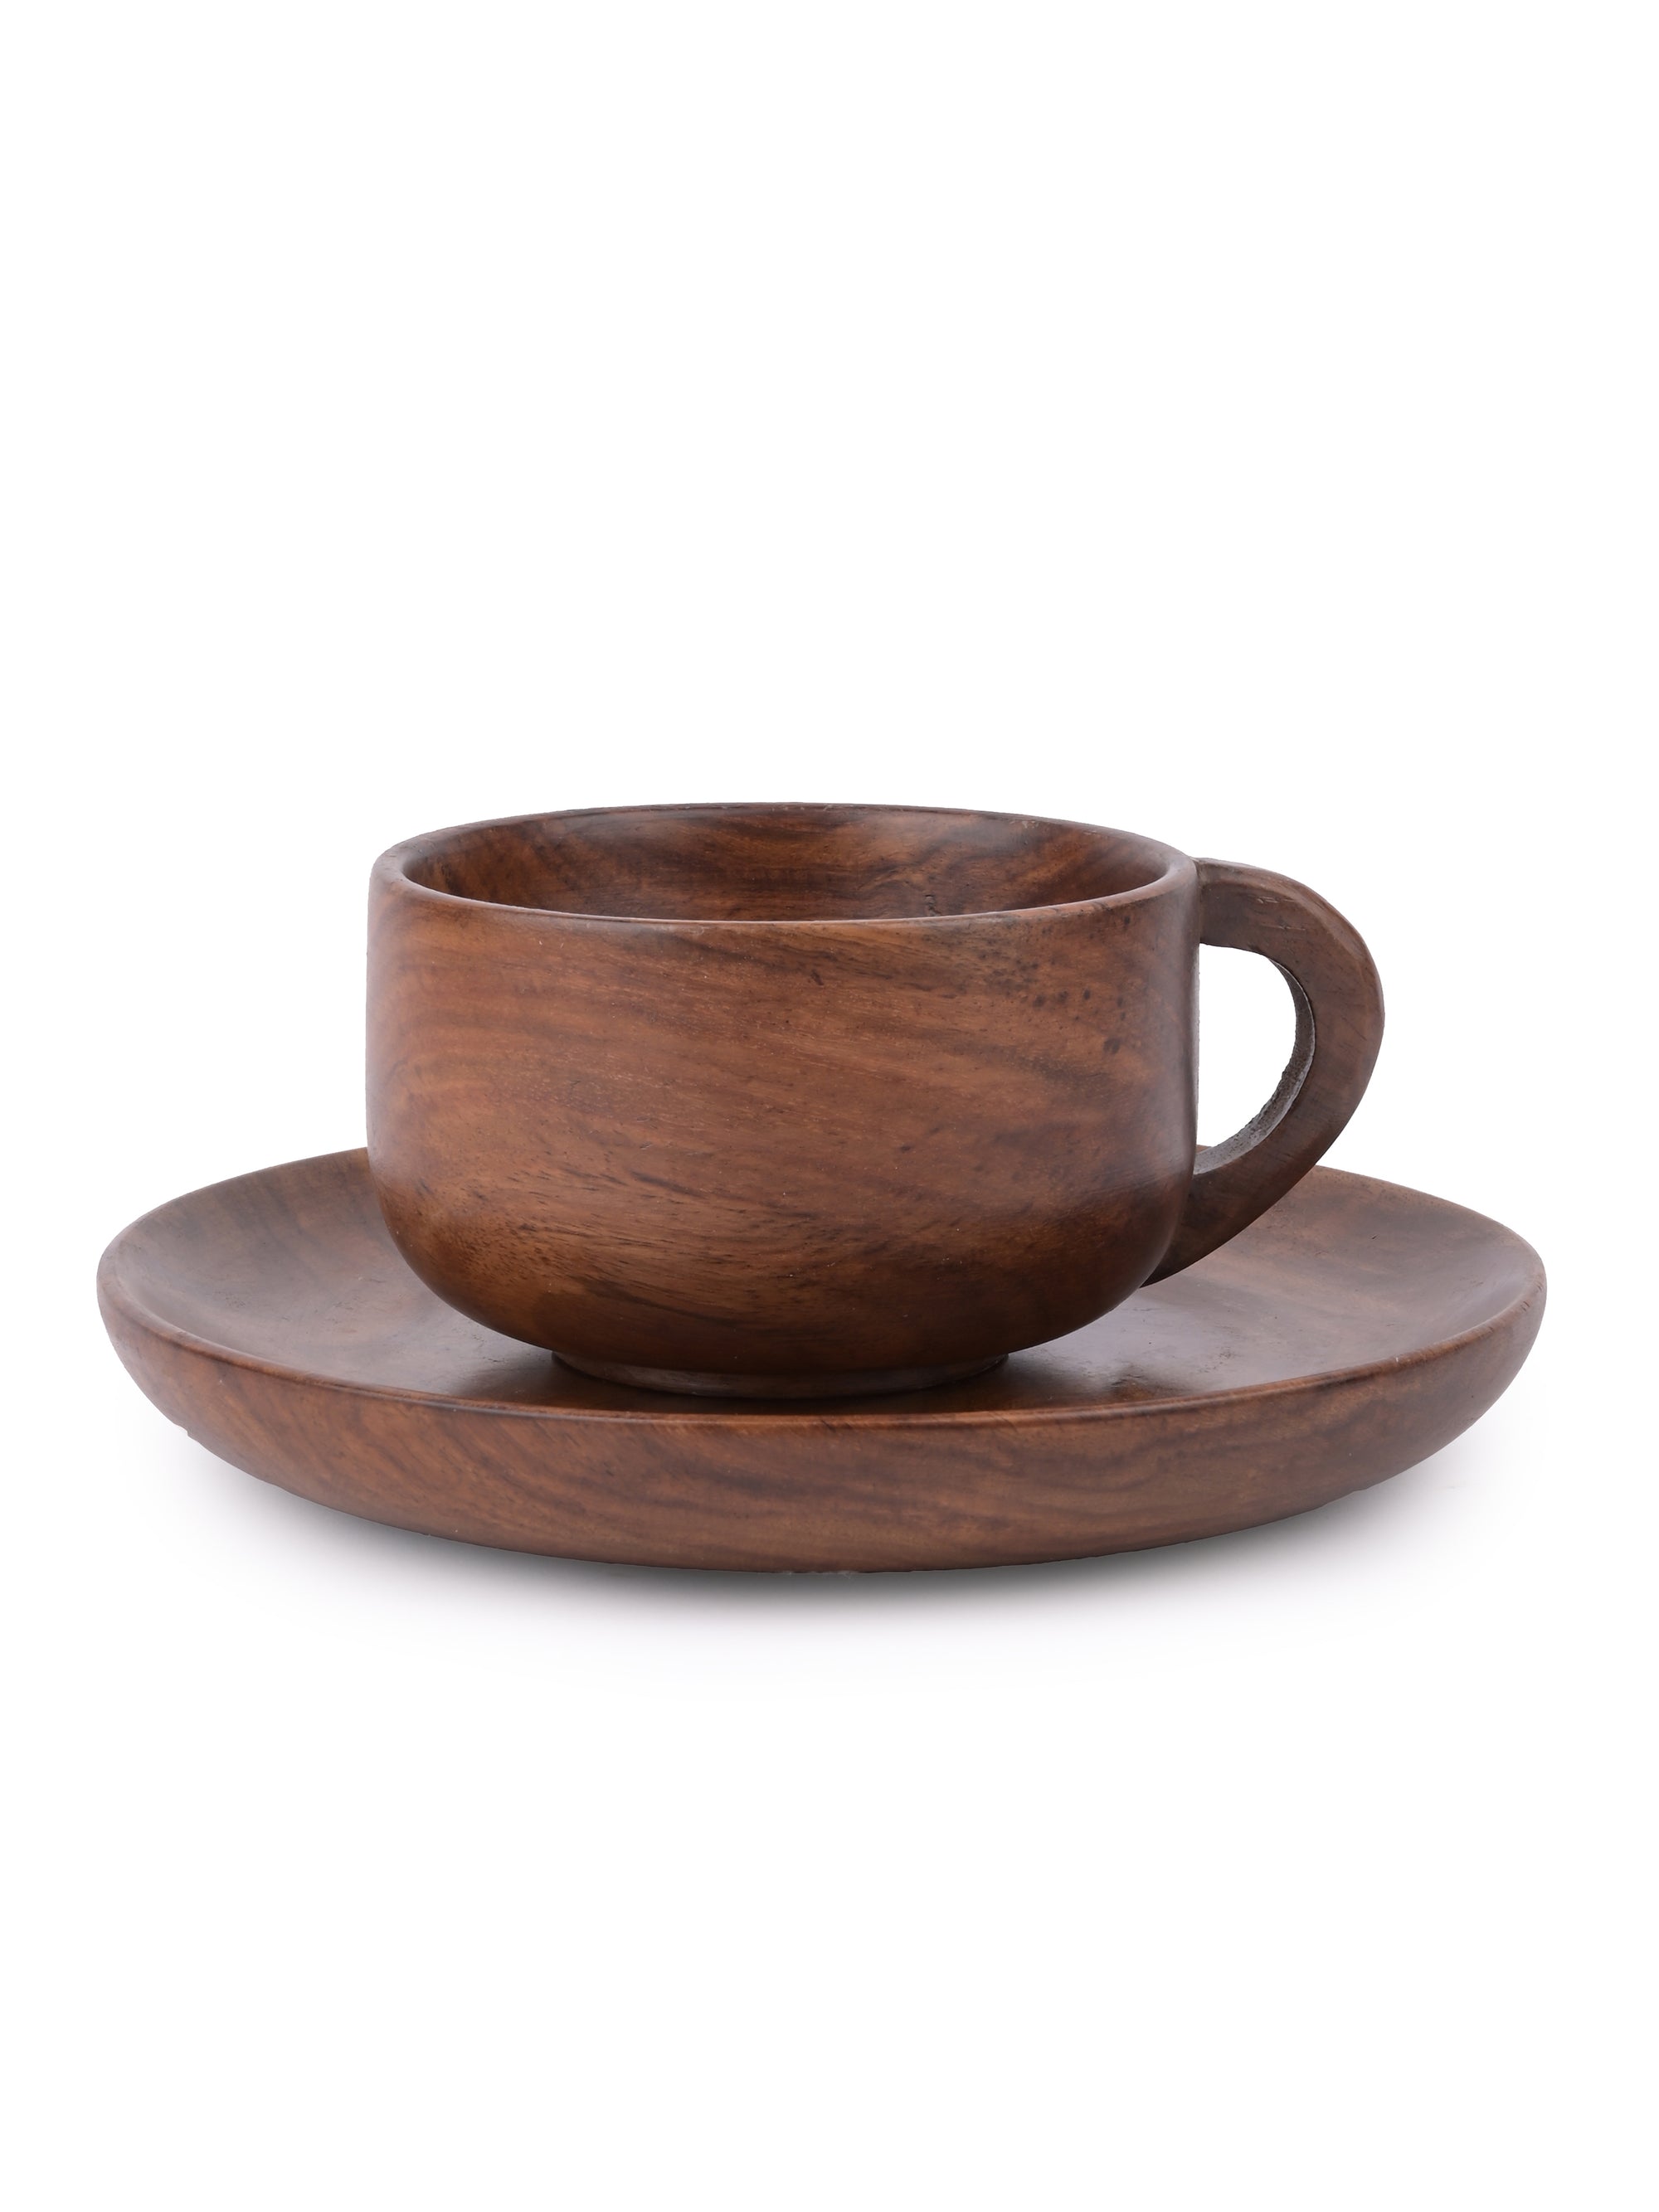 Natural Shisham wood Cup and Saucer set - 150 ml - The Heritage Artifacts